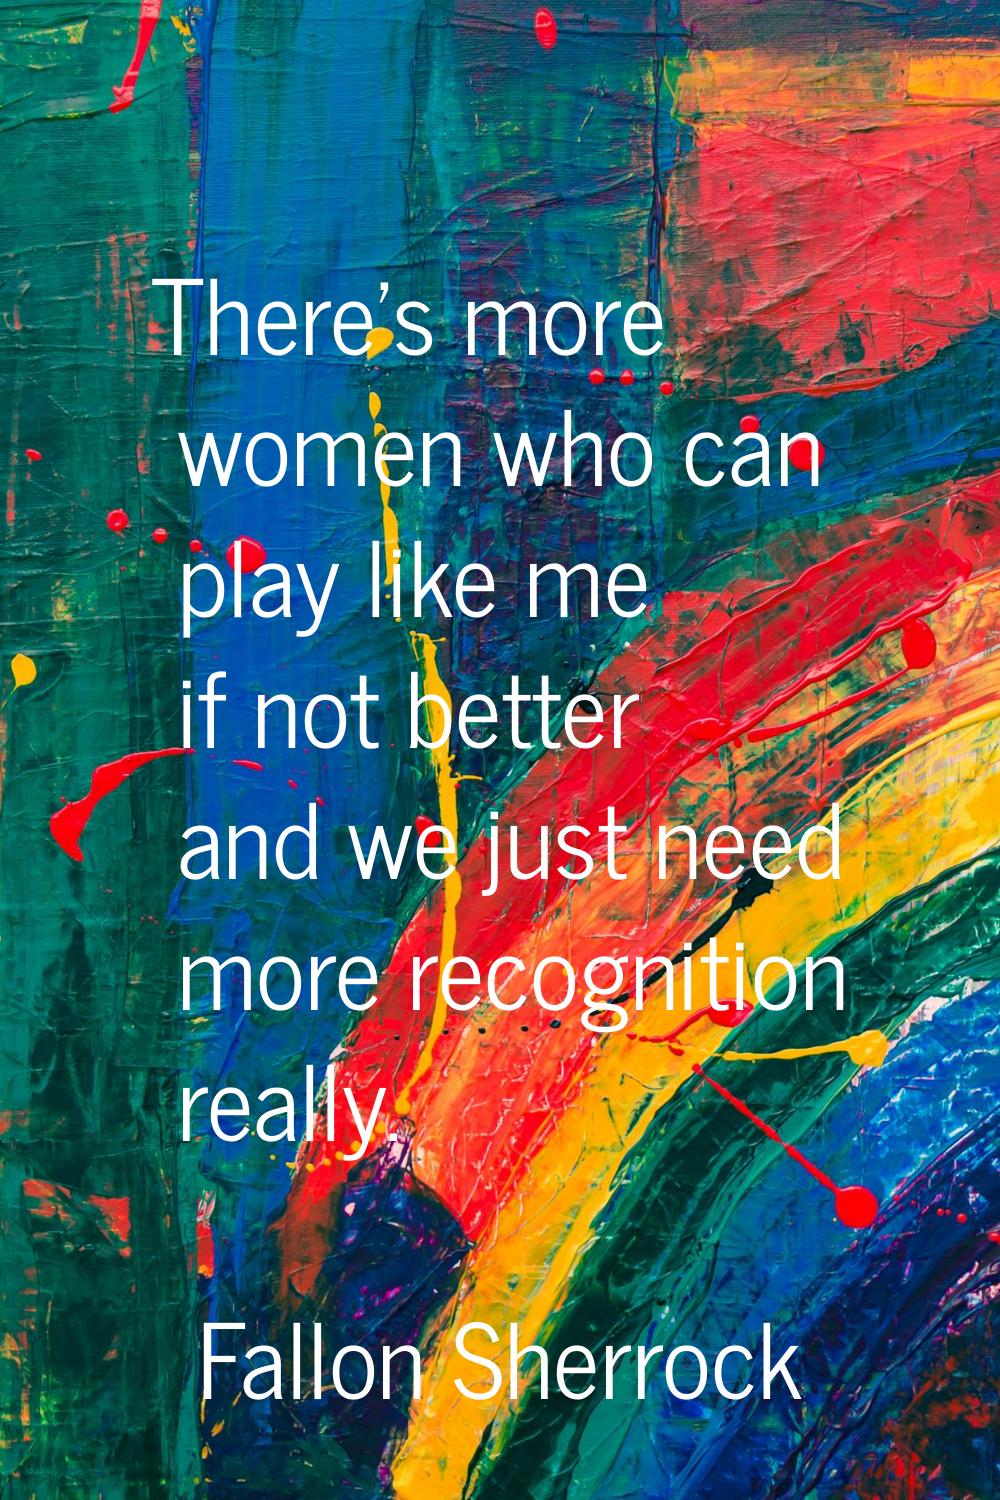 There's more women who can play like me if not better and we just need more recognition really.